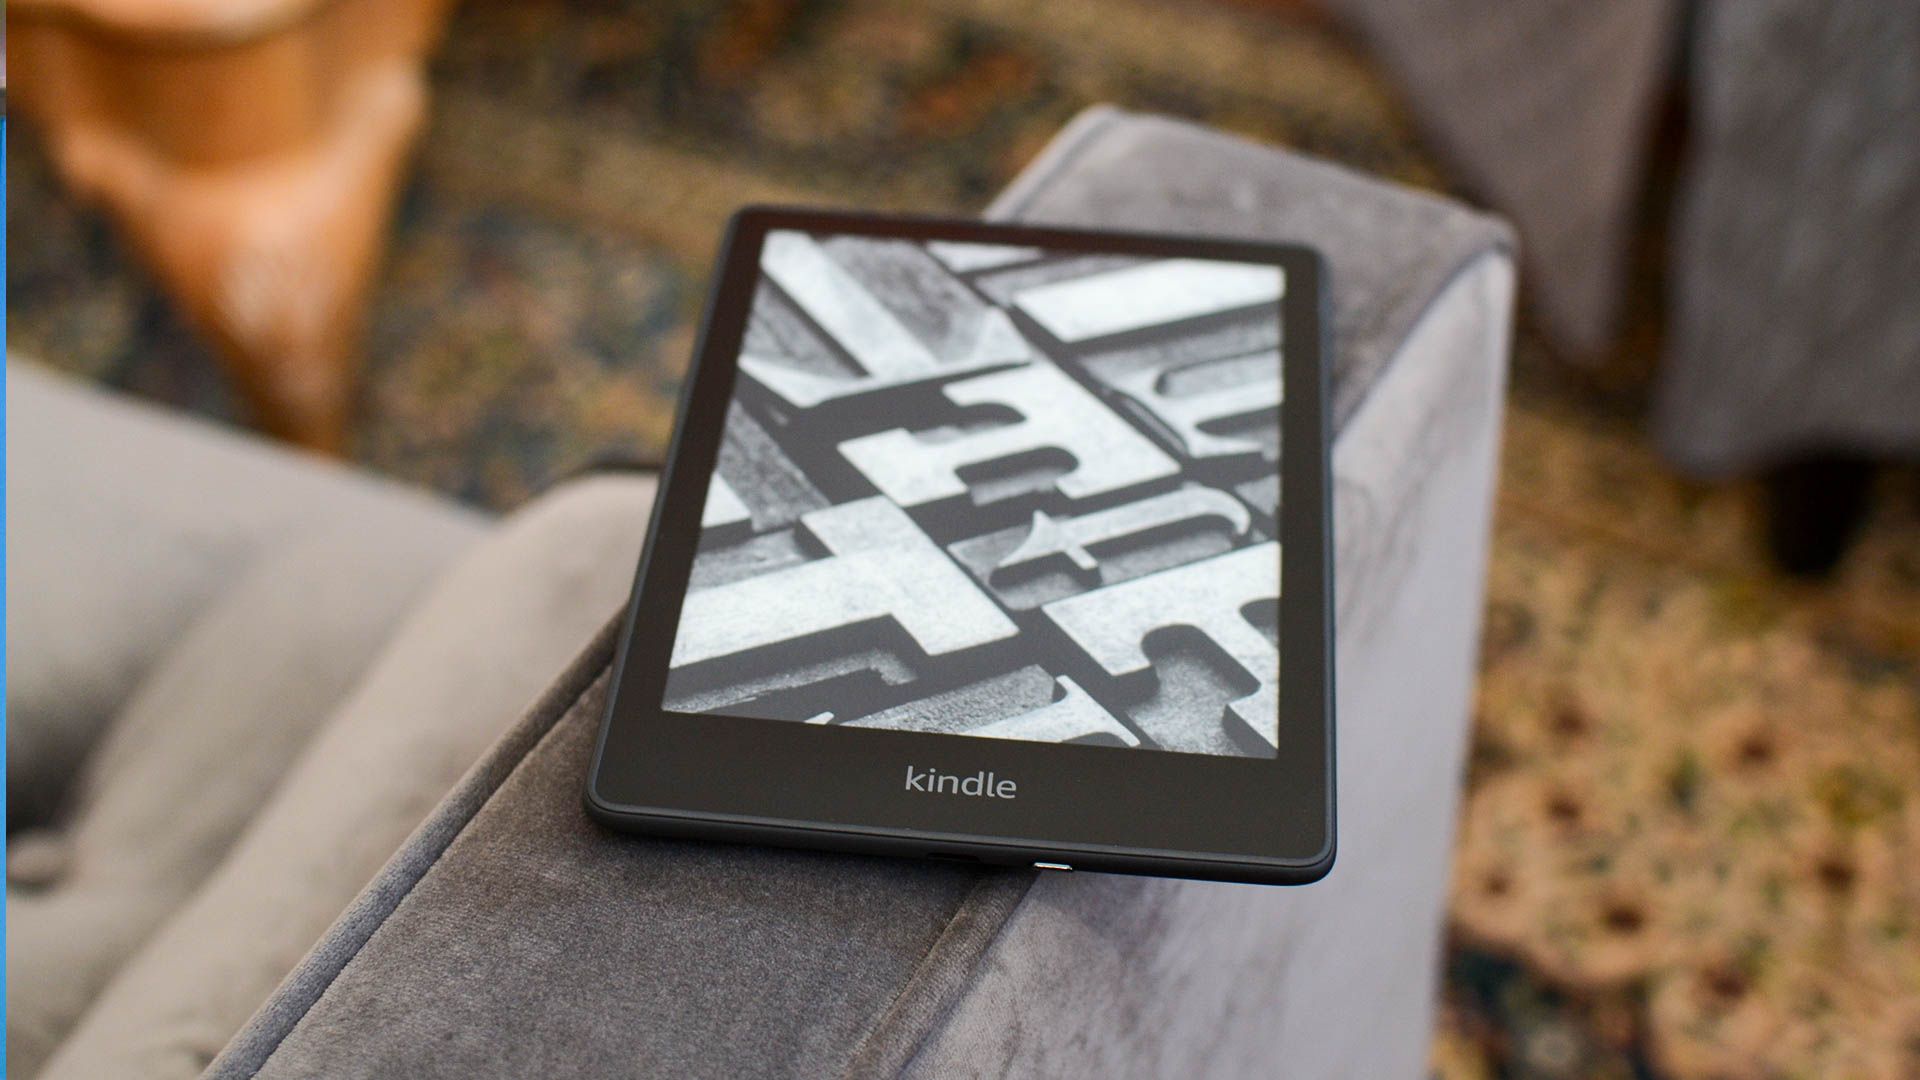 Kindle Paperwhite Signature Edition displaying lock screen on a couch arm